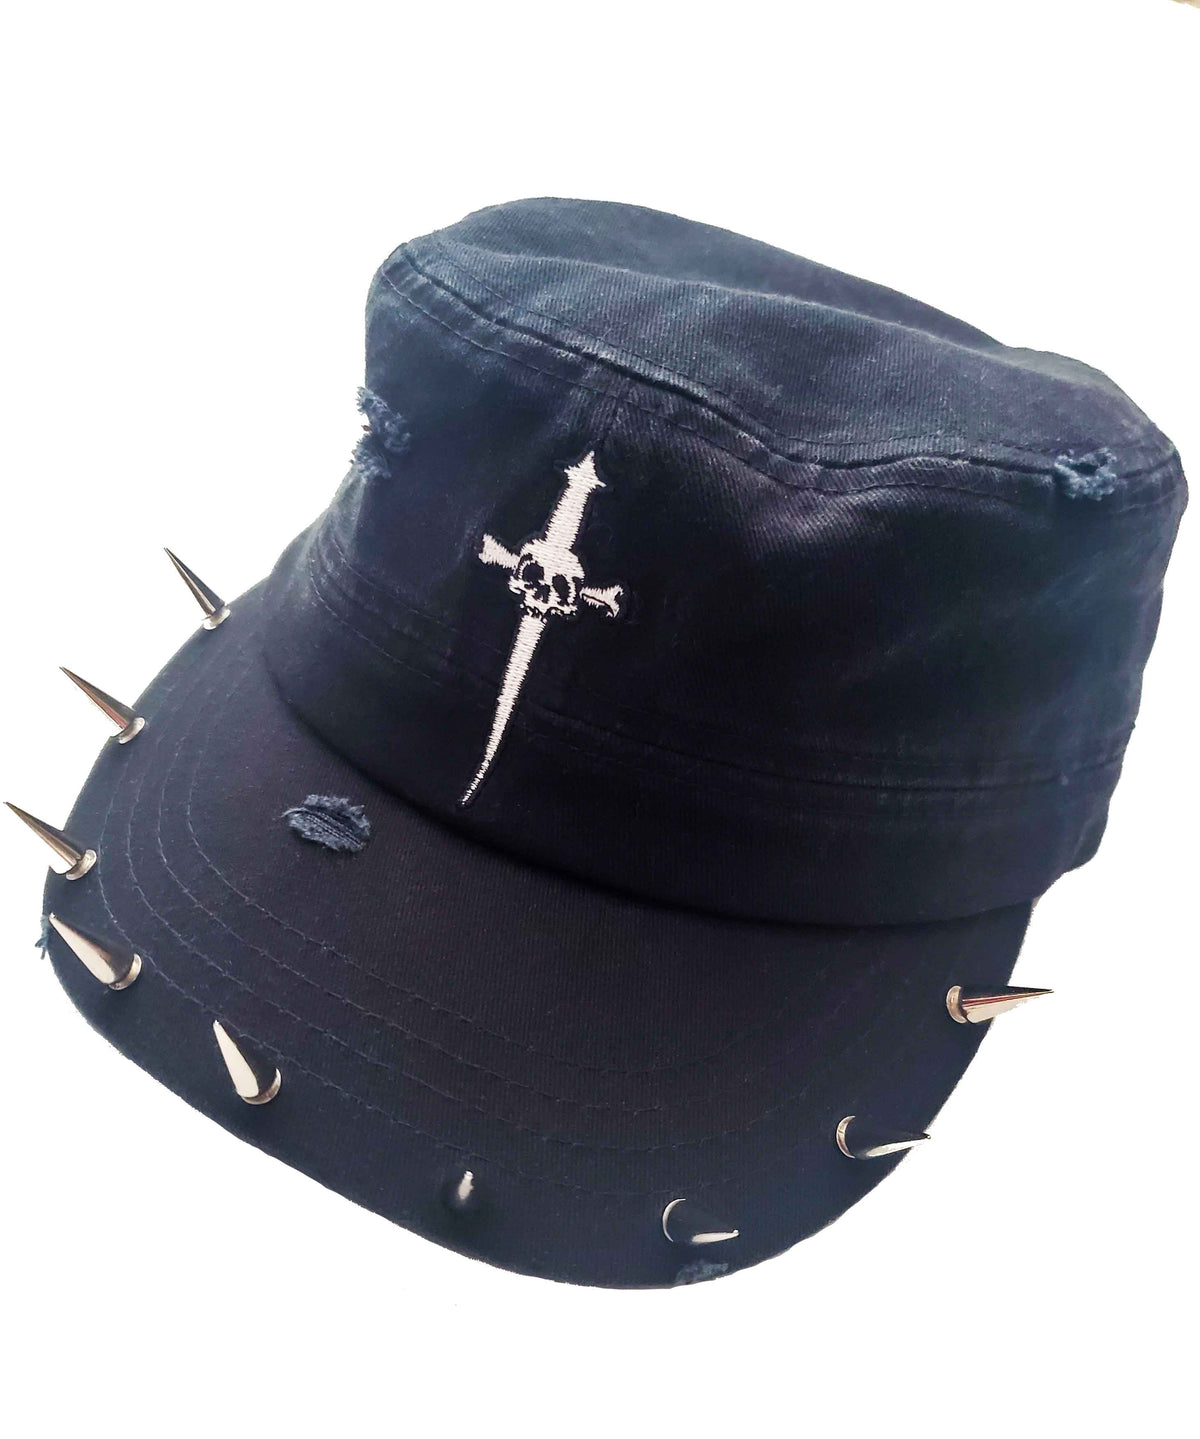 Spiked Distressed Rivethead Hat-Accessories-Lip Service